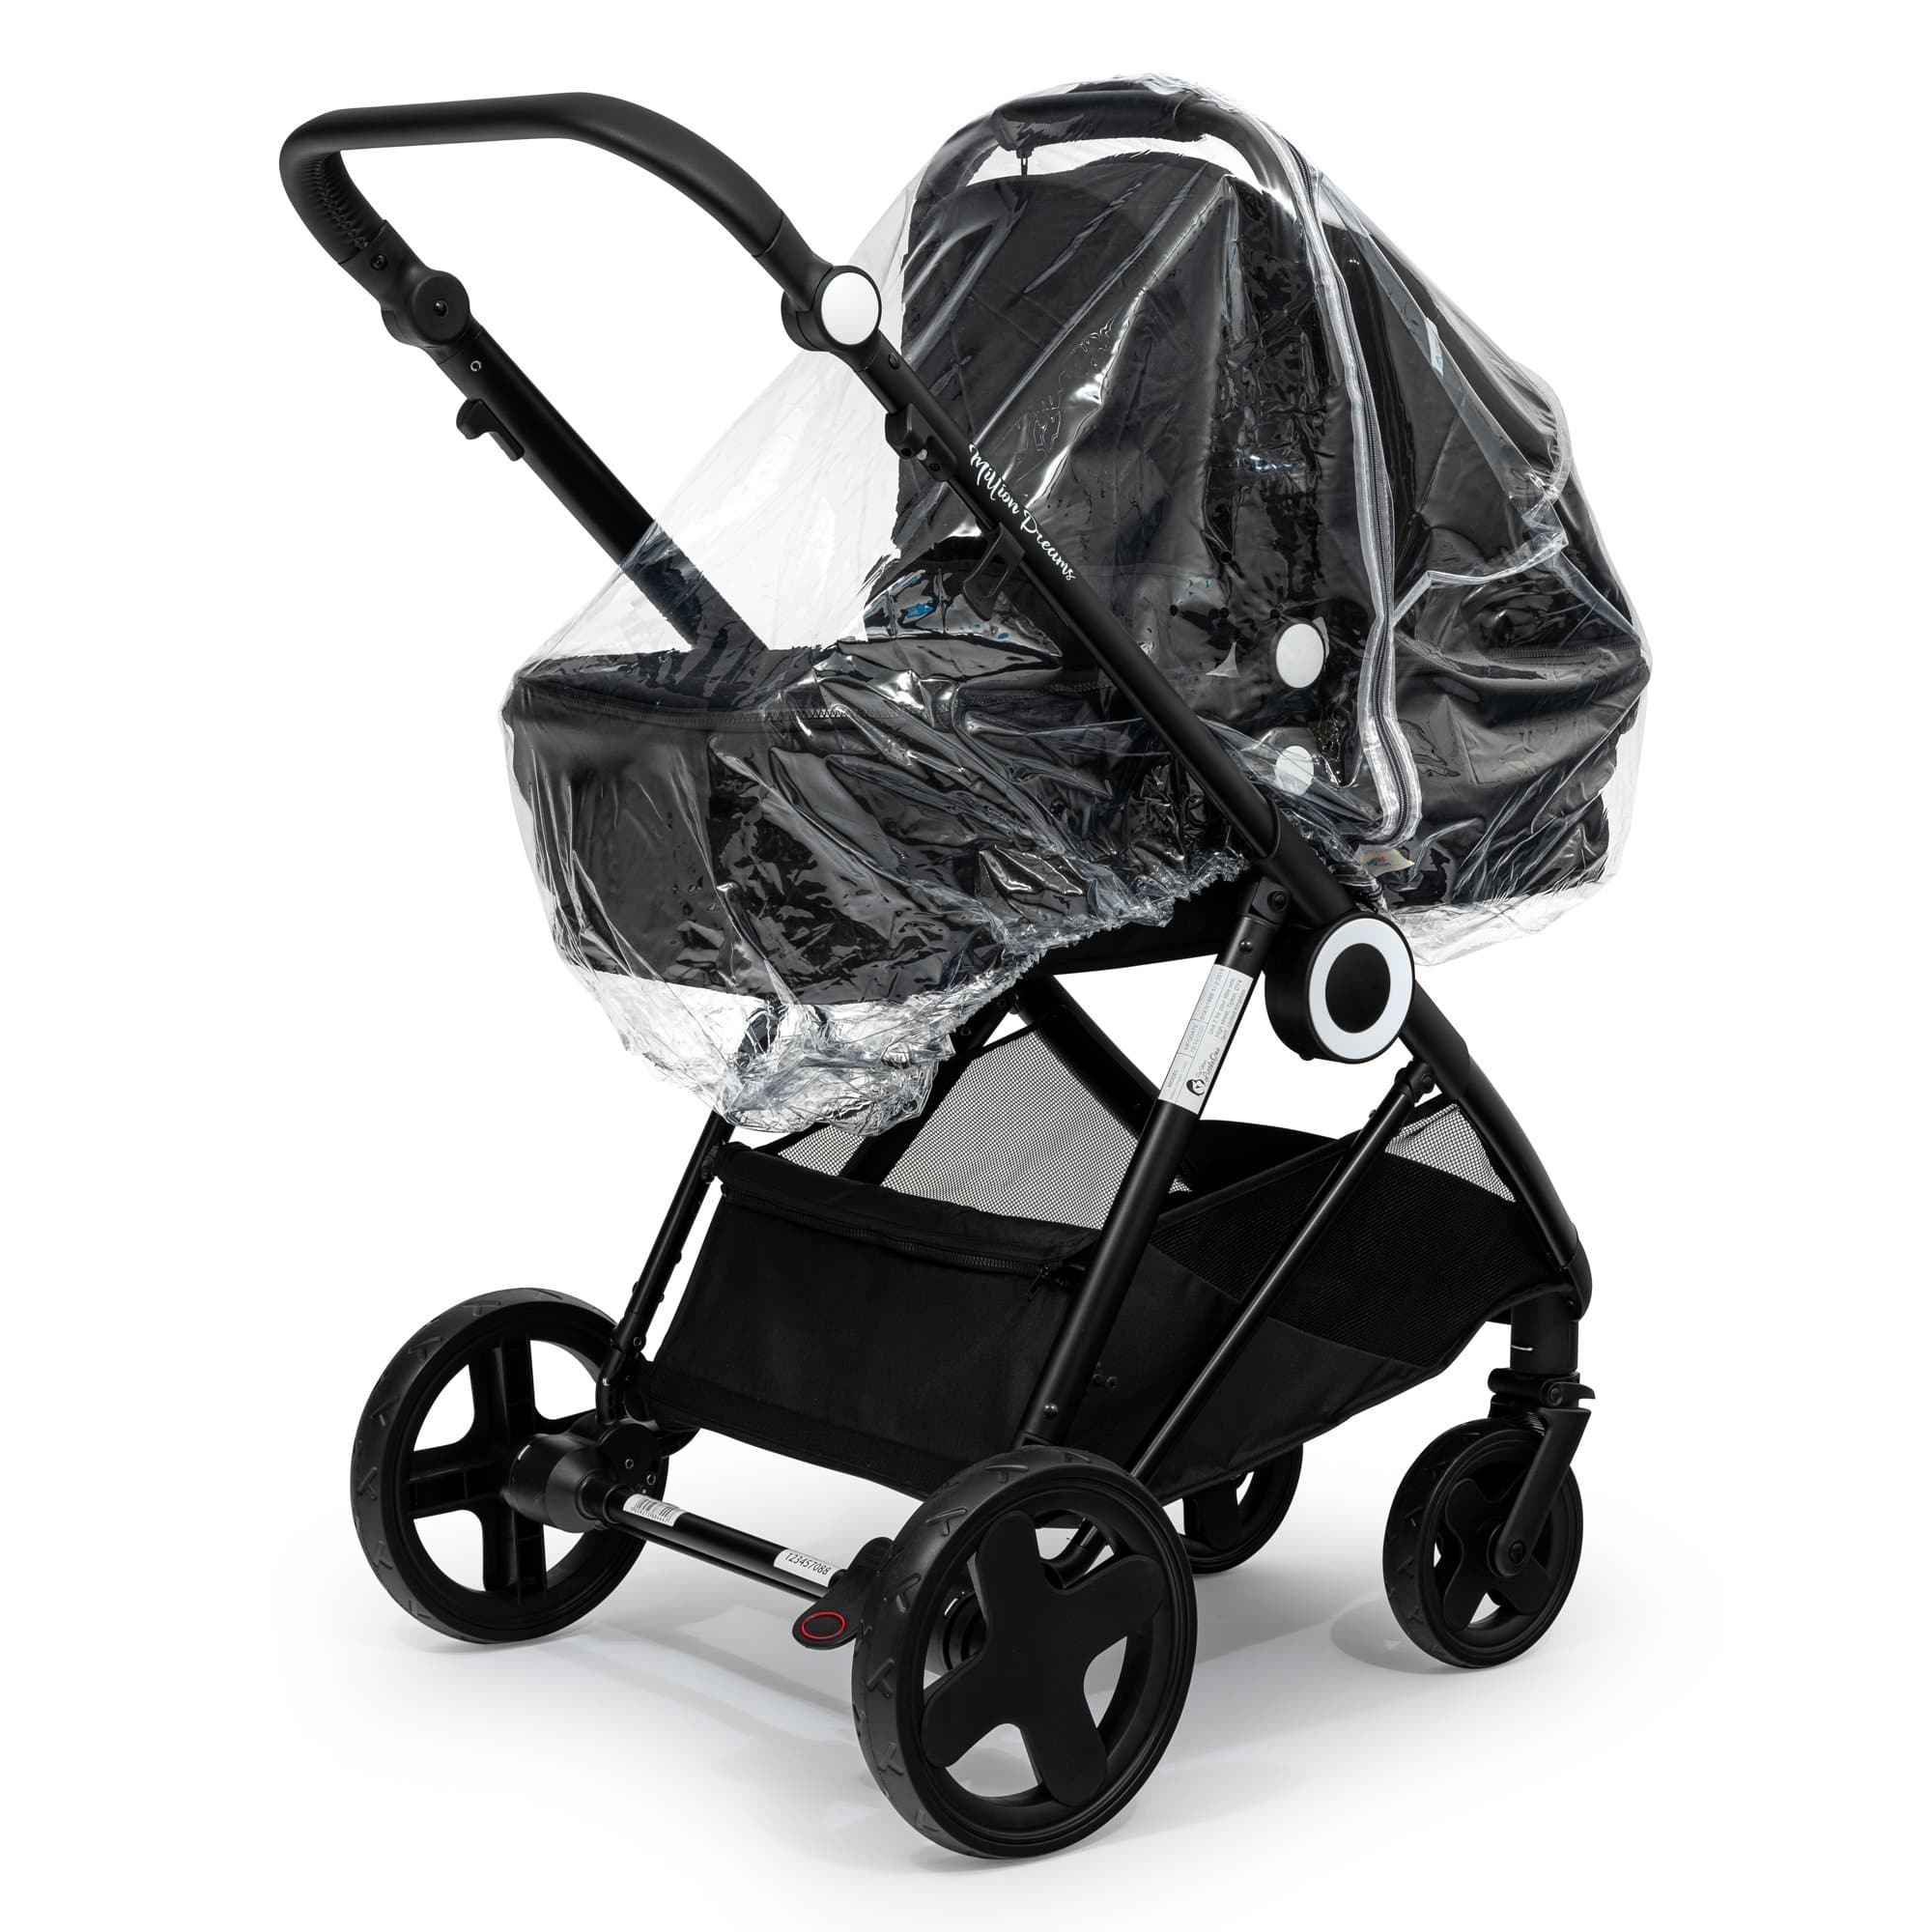 2 in 1 Rain Cover Compatible with Kiddicare - Fits All Models - For Your Little One